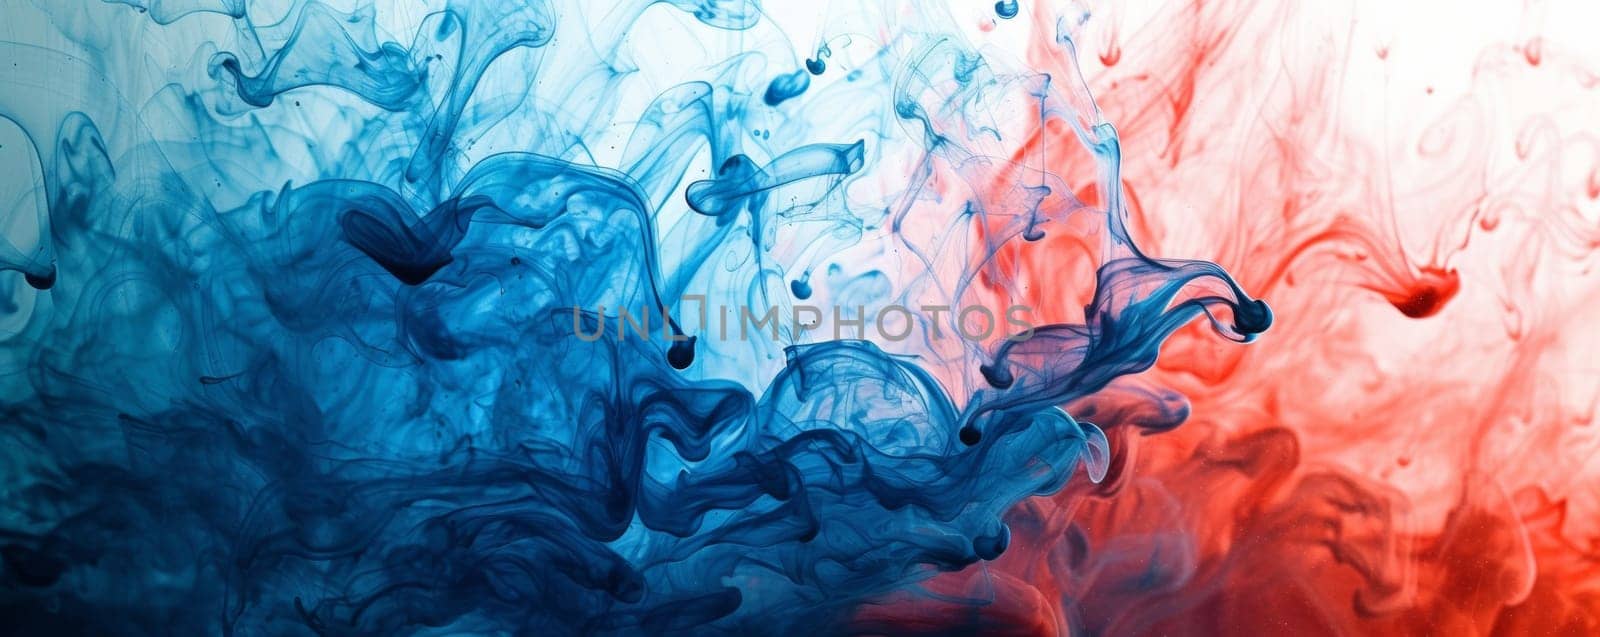 Red and Blue Liquid in Water.